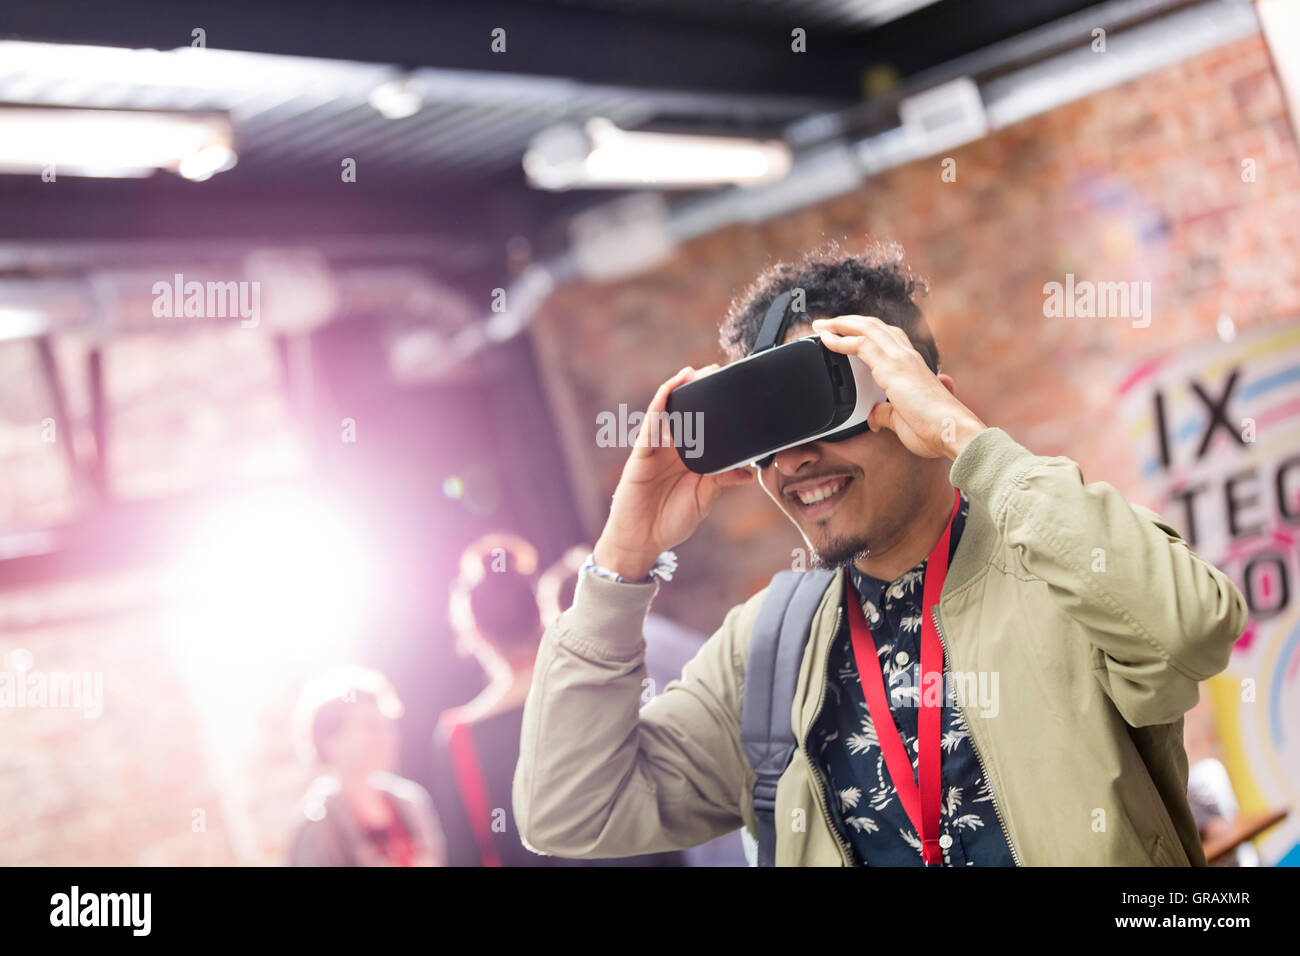 Man trying virtual reality simulator glasses at technology conference Stock Photo